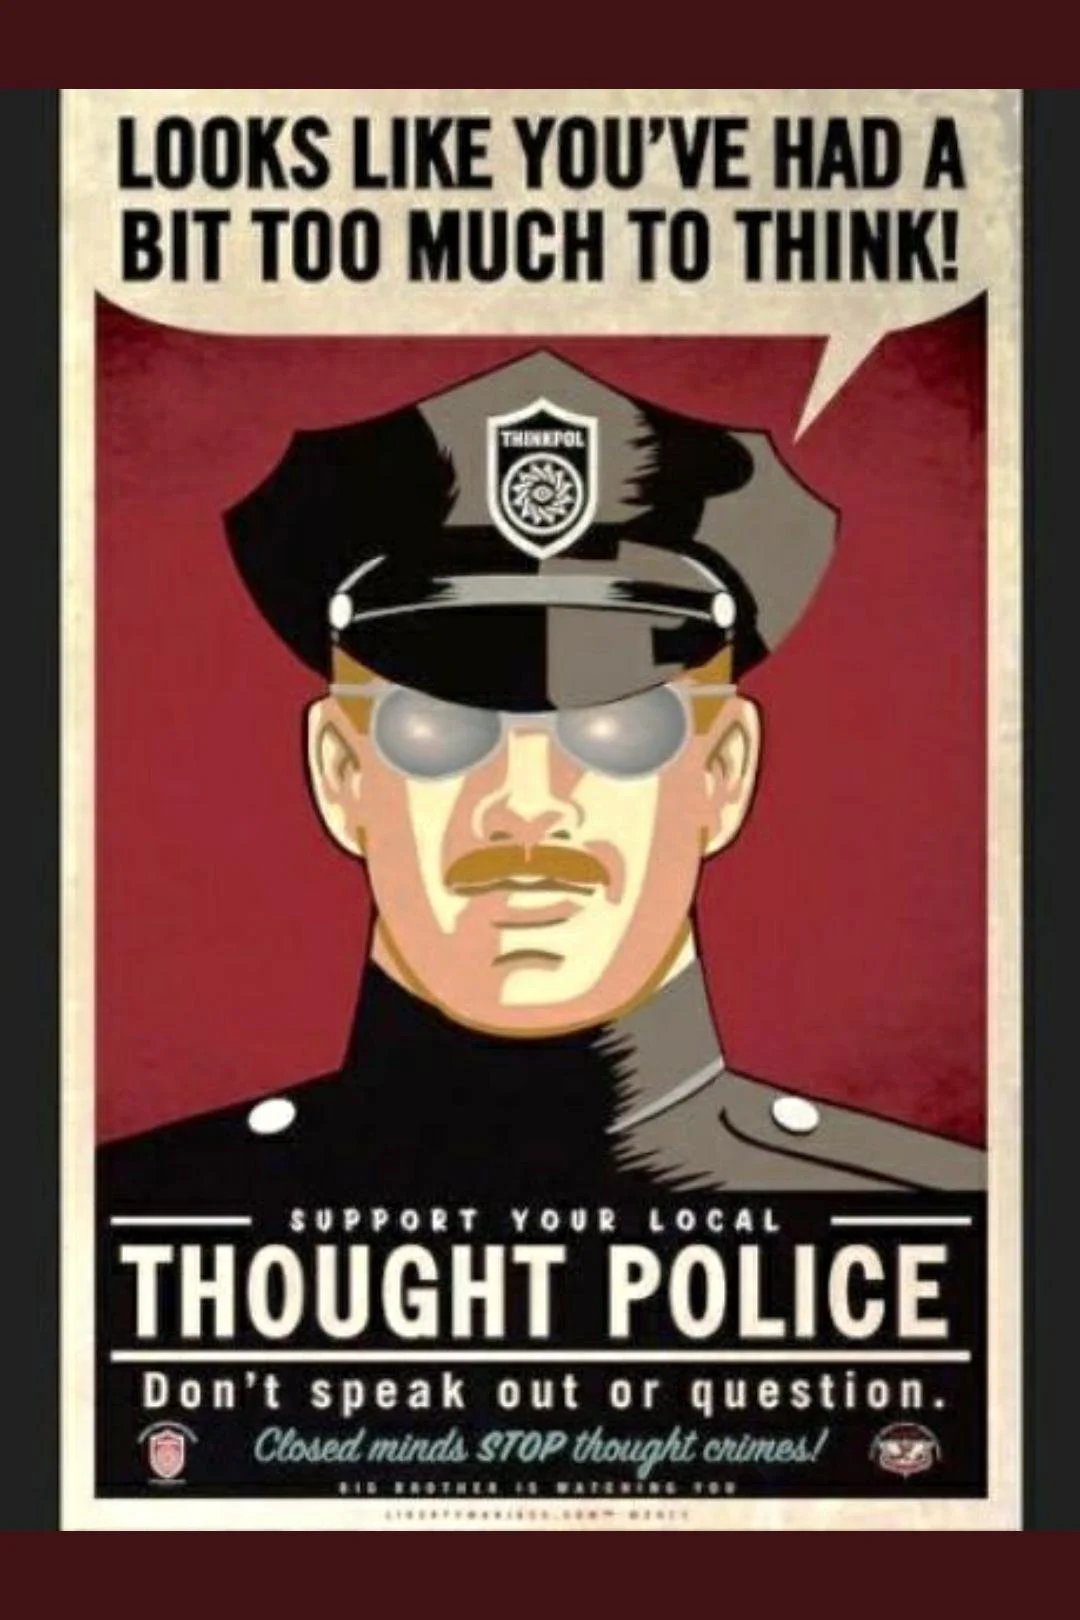 A policeman reminding you that you've done too much thinking recently